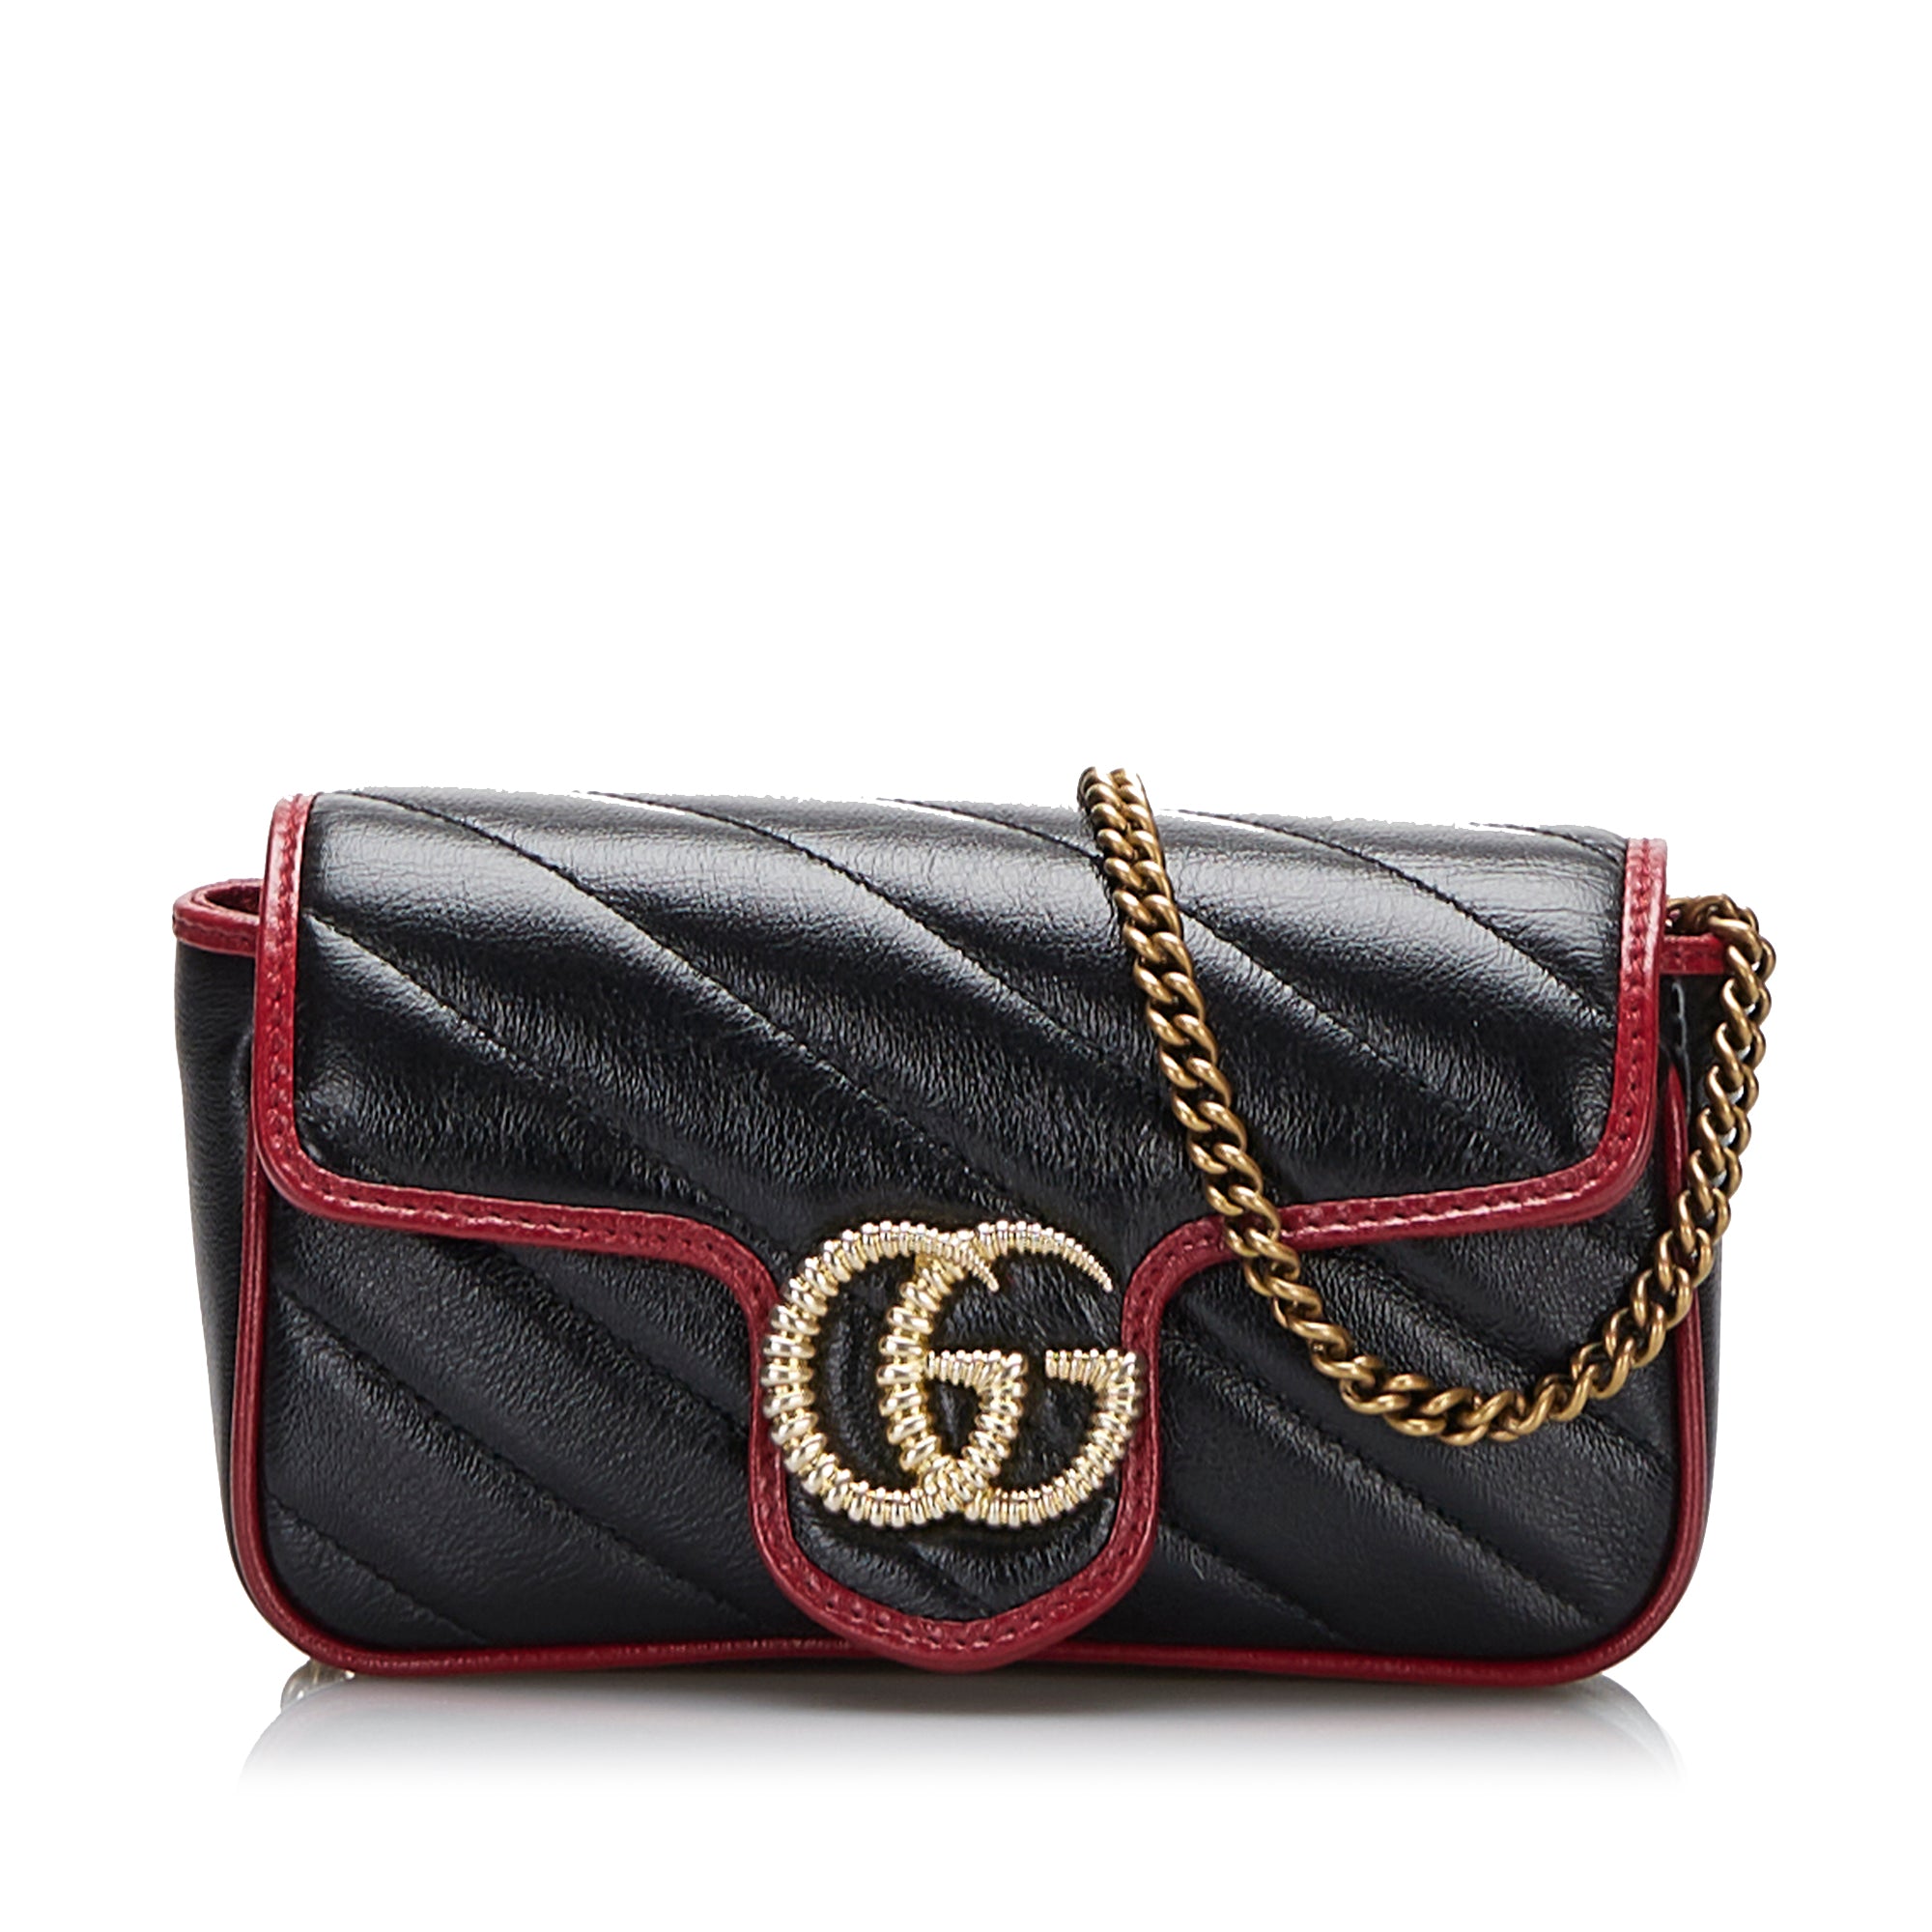 Gucci, Bags, Gucci Mini Satchel Red Leather Gg Embossed